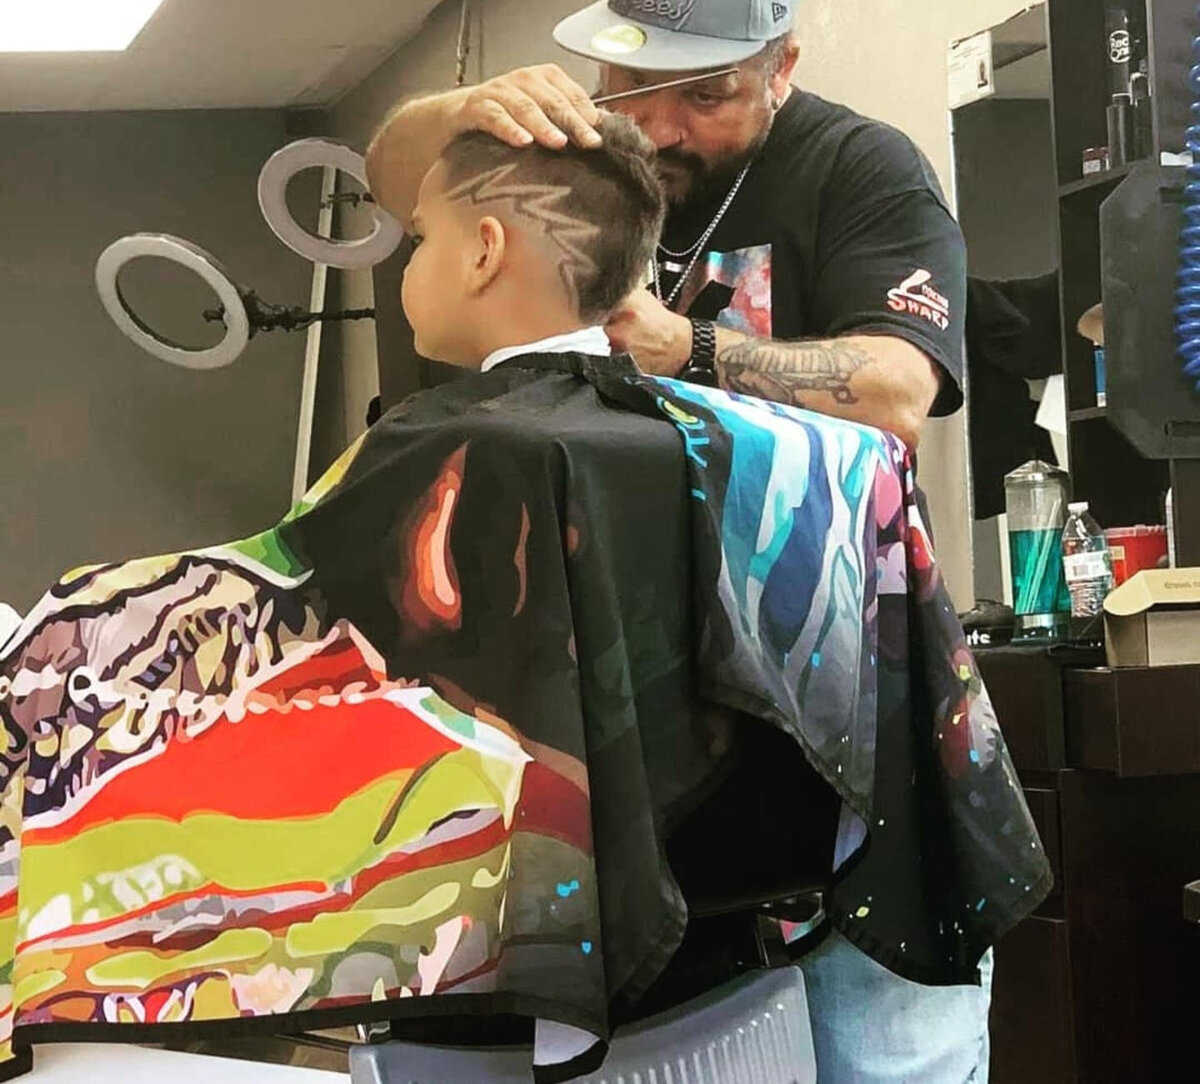 Boy's Fade Haircut -Kids Cut at Whos Your Barber in Venice Florida